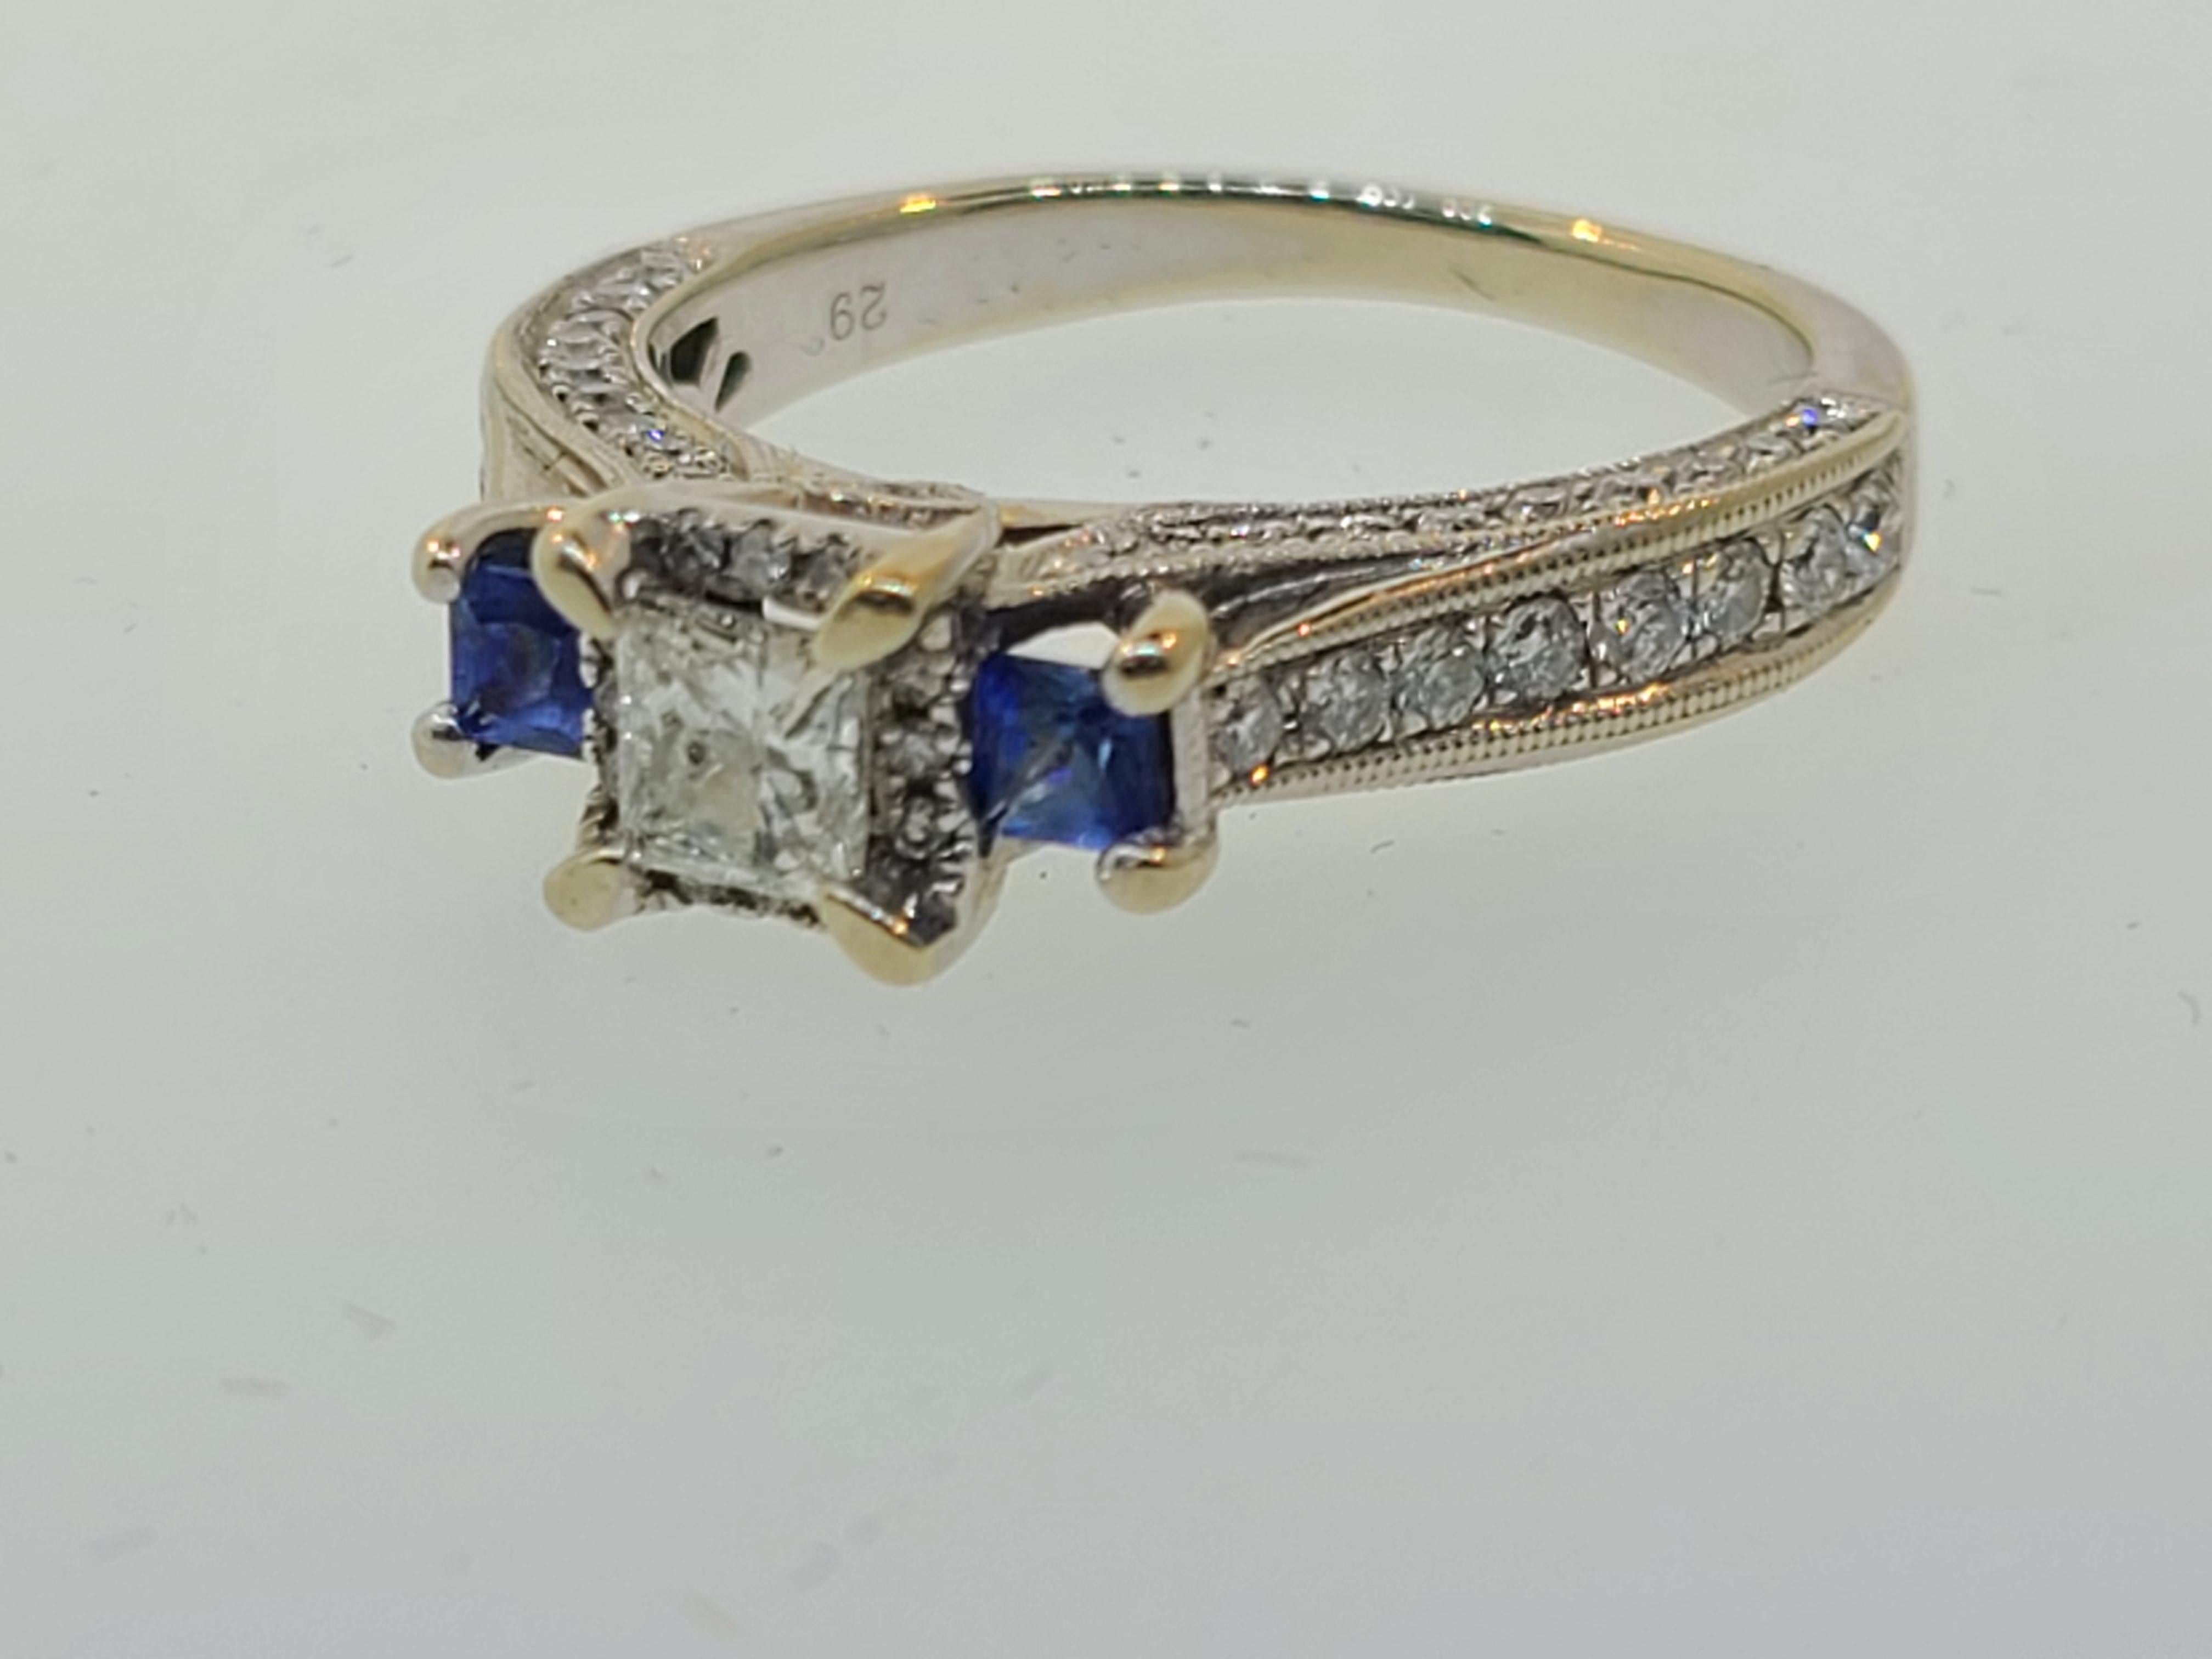 This 14k white gold engagement ring features a  4.20mm princess cut diamond center solitaire secured in a four-prong setting complemented by a recessed halo of nine round brilliant cut diamonds for added dimension. Two square cut blue sapphires give